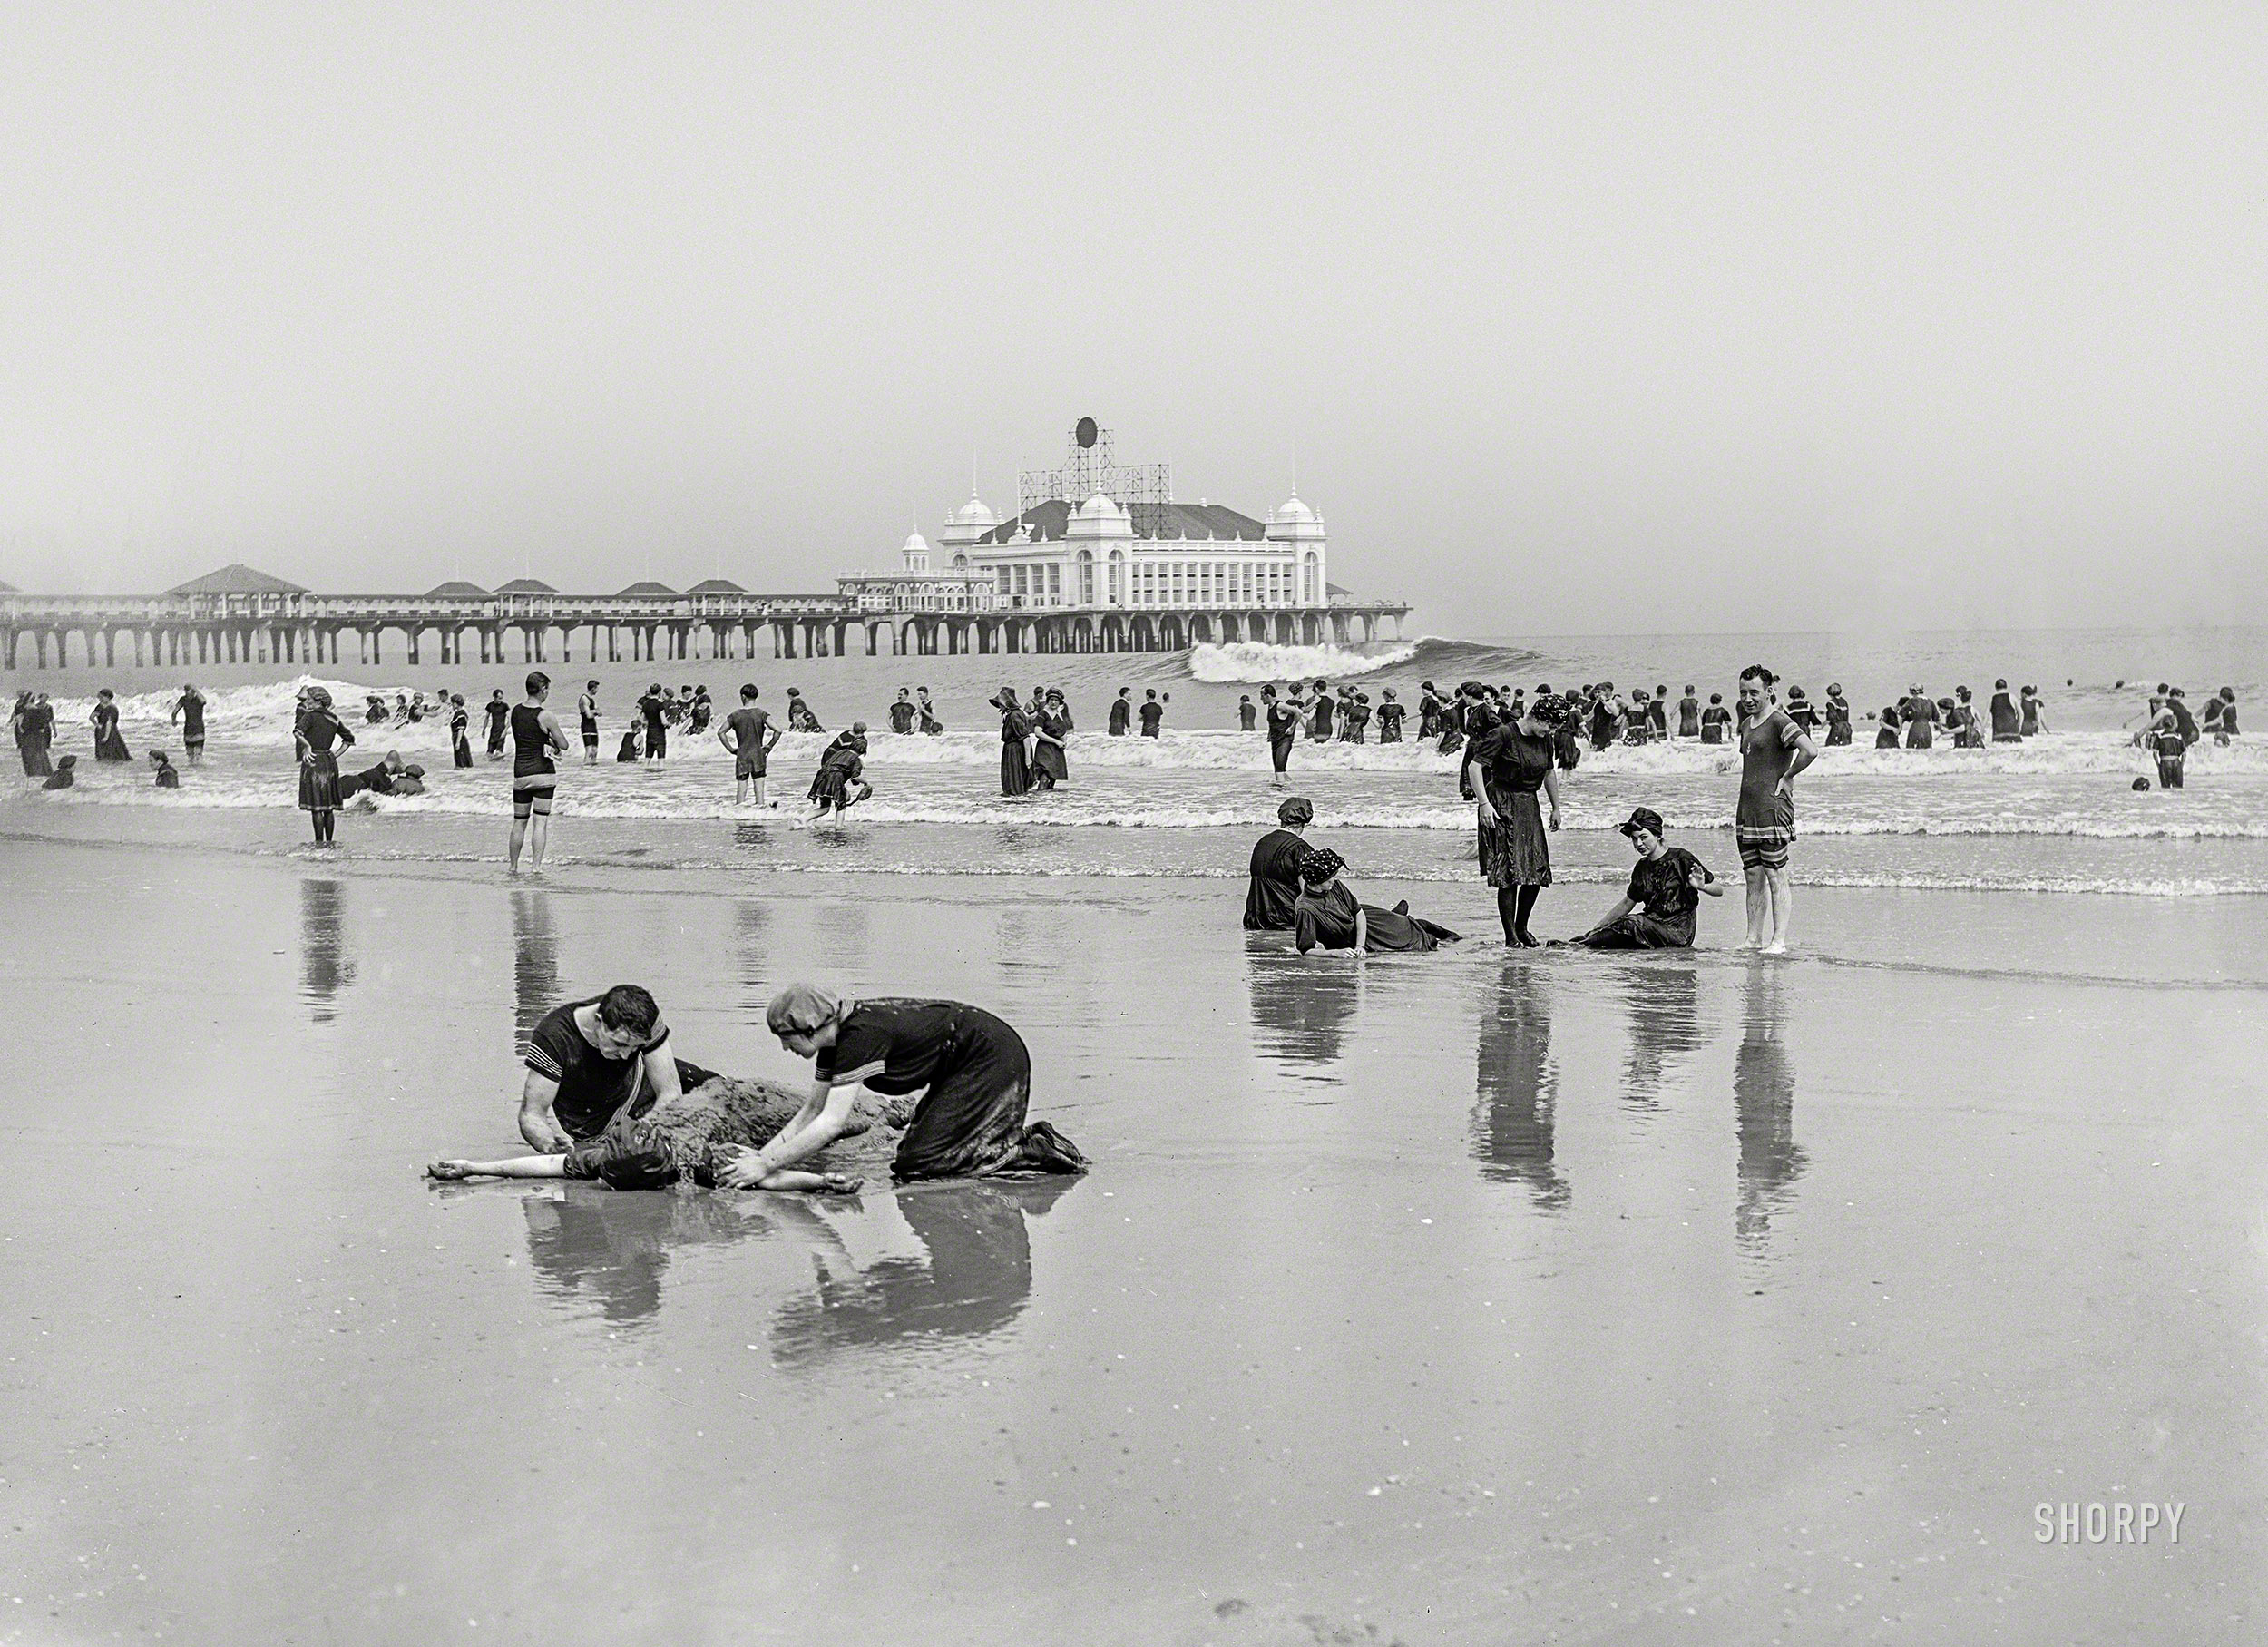 Atlantic City, New Jersey, circa 1905. "Beach bathers and Steel Pier." And a girl we'll call Sandy. 5x7 inch dry plate glass negative, Detroit Photographic Company. View full size.